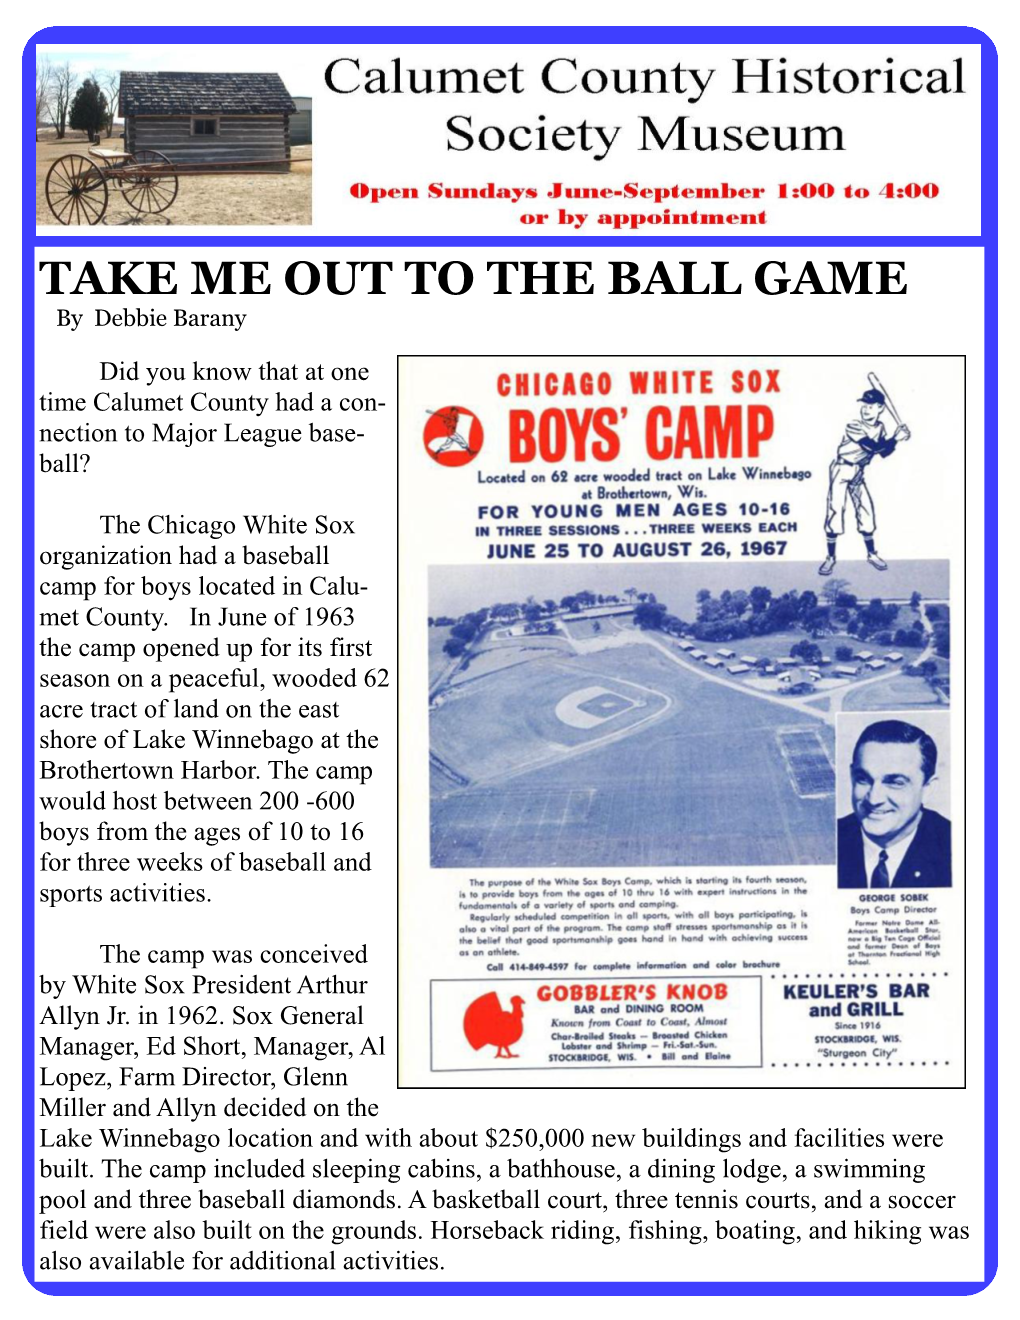 TAKE ME out to the BALL GAME by Debbie Barany